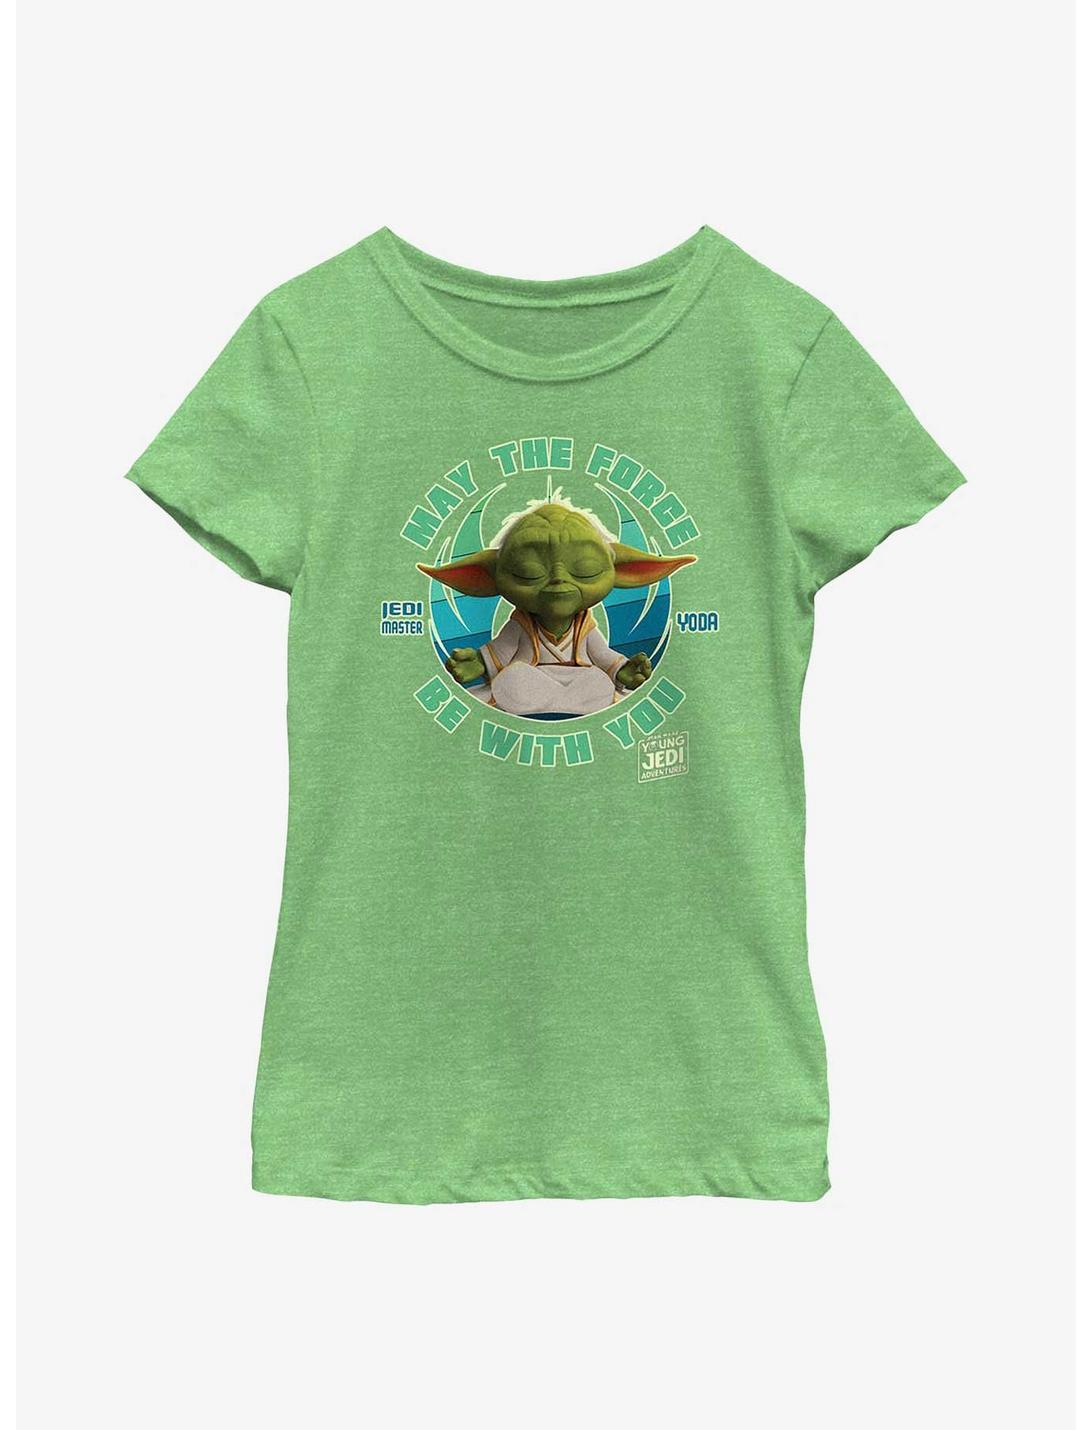 Star Wars: Young Jedi Adventures Master Yoda May The Force Be With You Youth Girls T-Shirt, GRN APPLE, hi-res